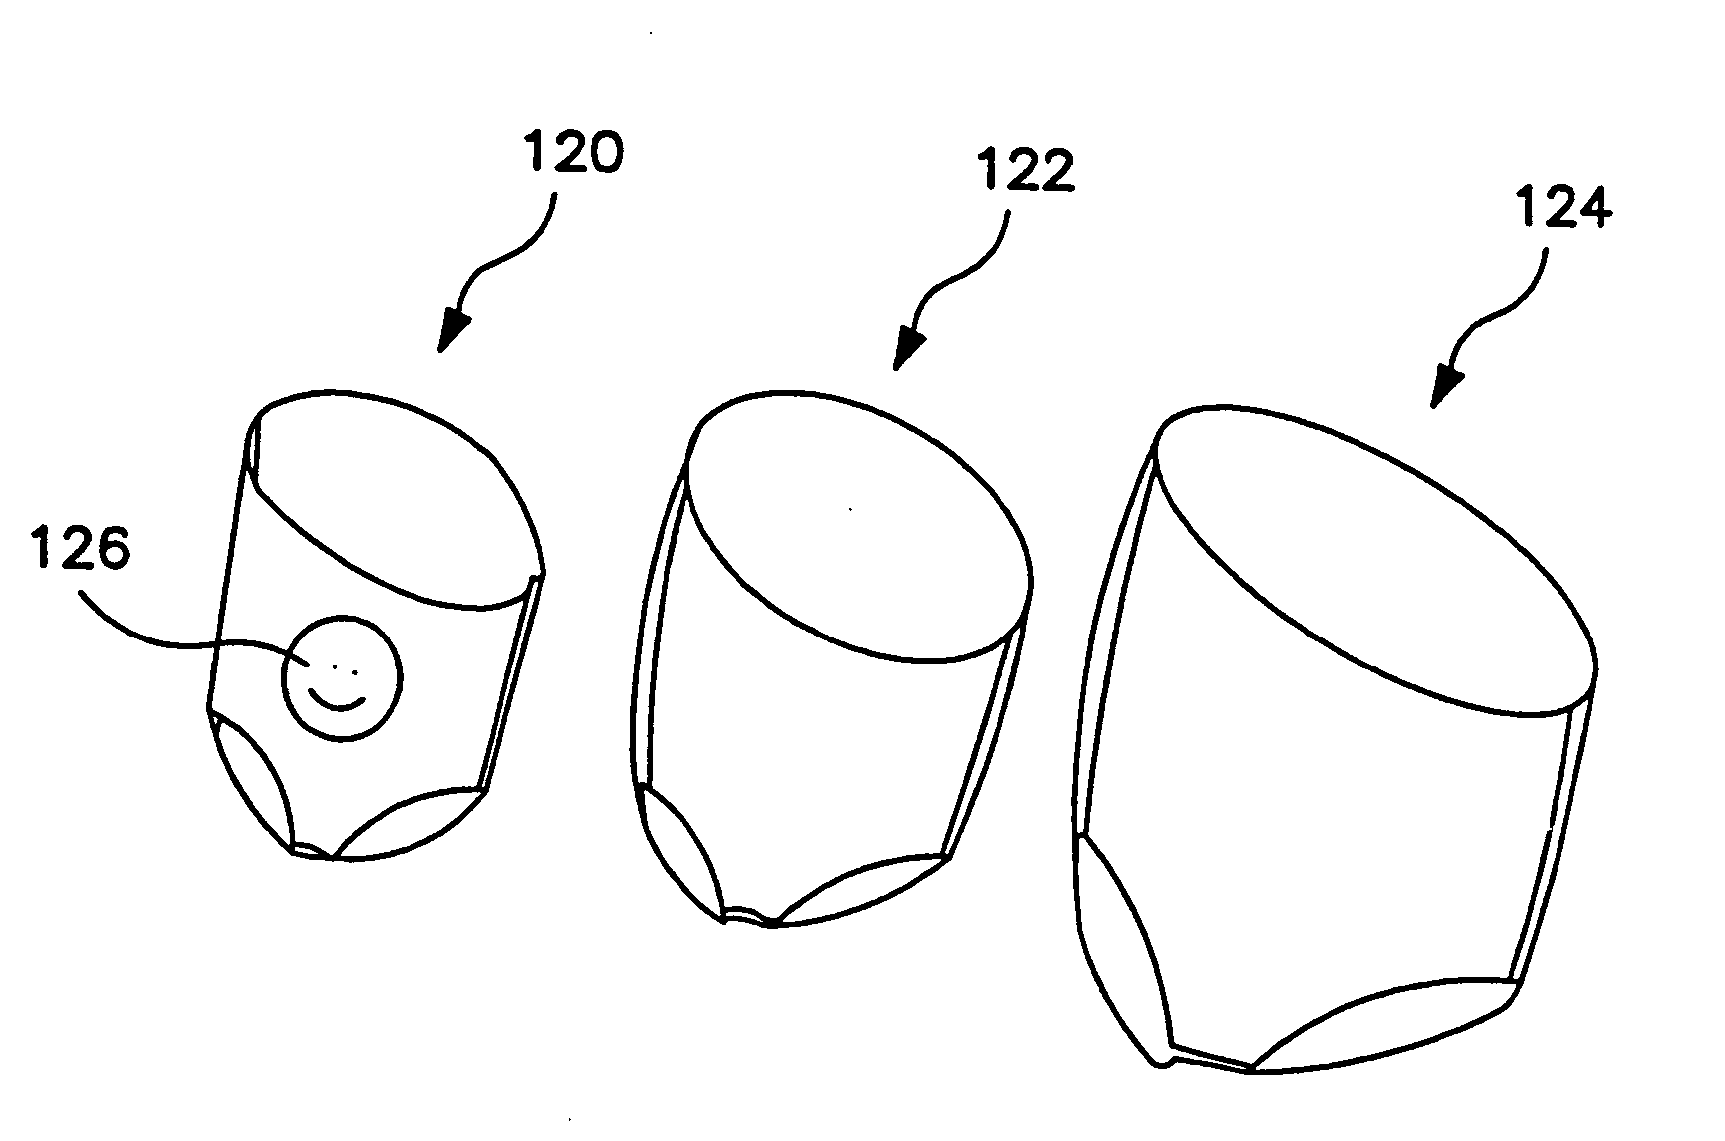 Method of providing a series of disposable absorbent articles to consumers